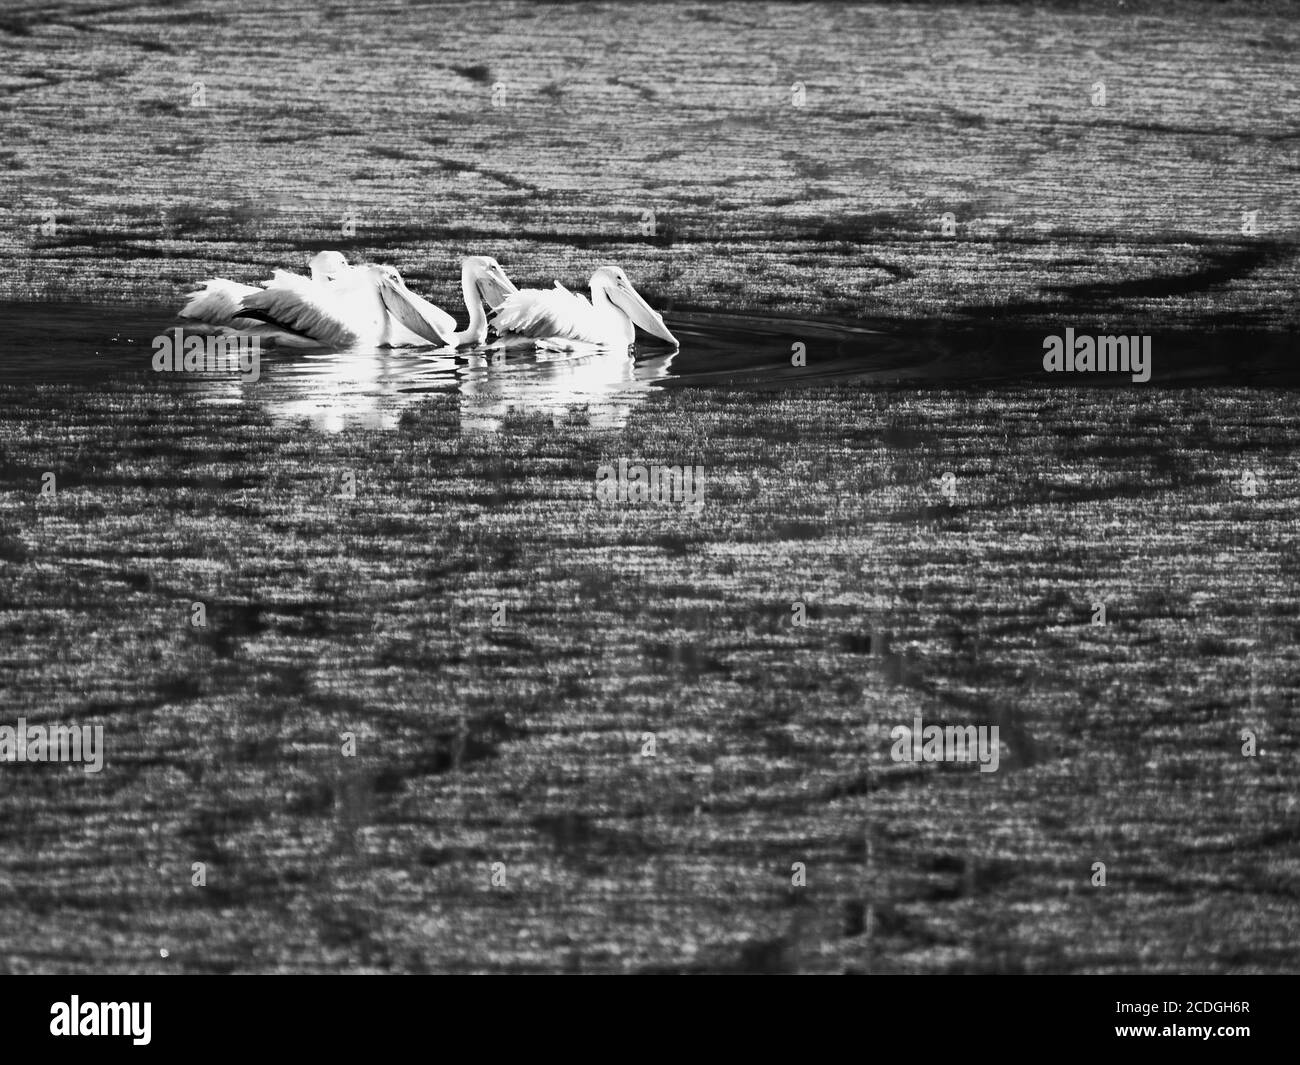 The Woodlands TX USA - 02-07-2020 - Great White Pelicans In Green Pond in B&W Stockfoto